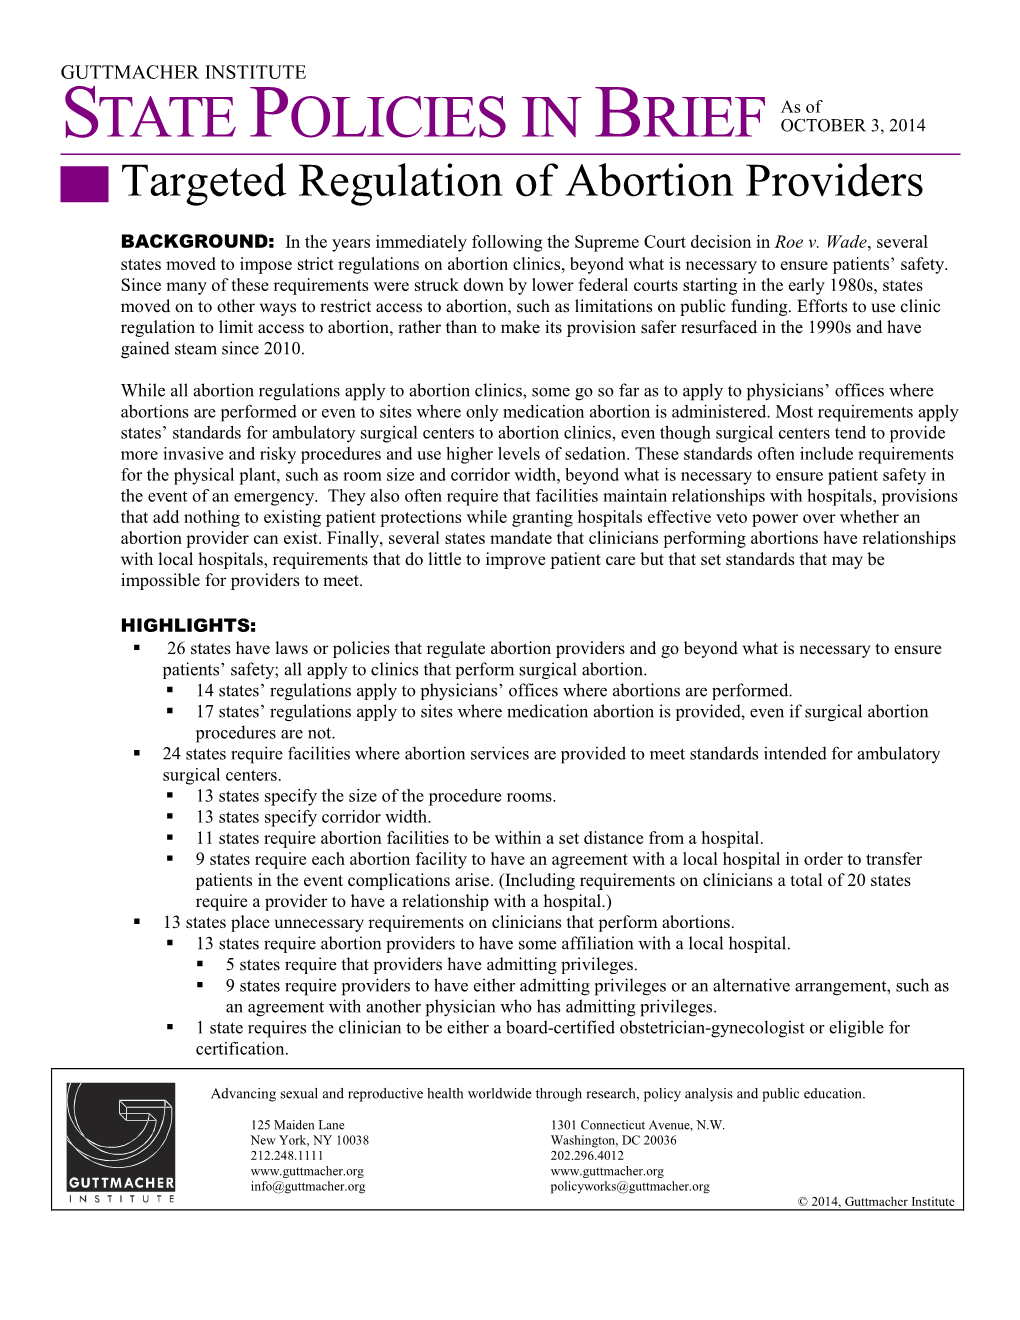 Targeted Regulation of Abortion Providers, Abortion Clinic Regulation